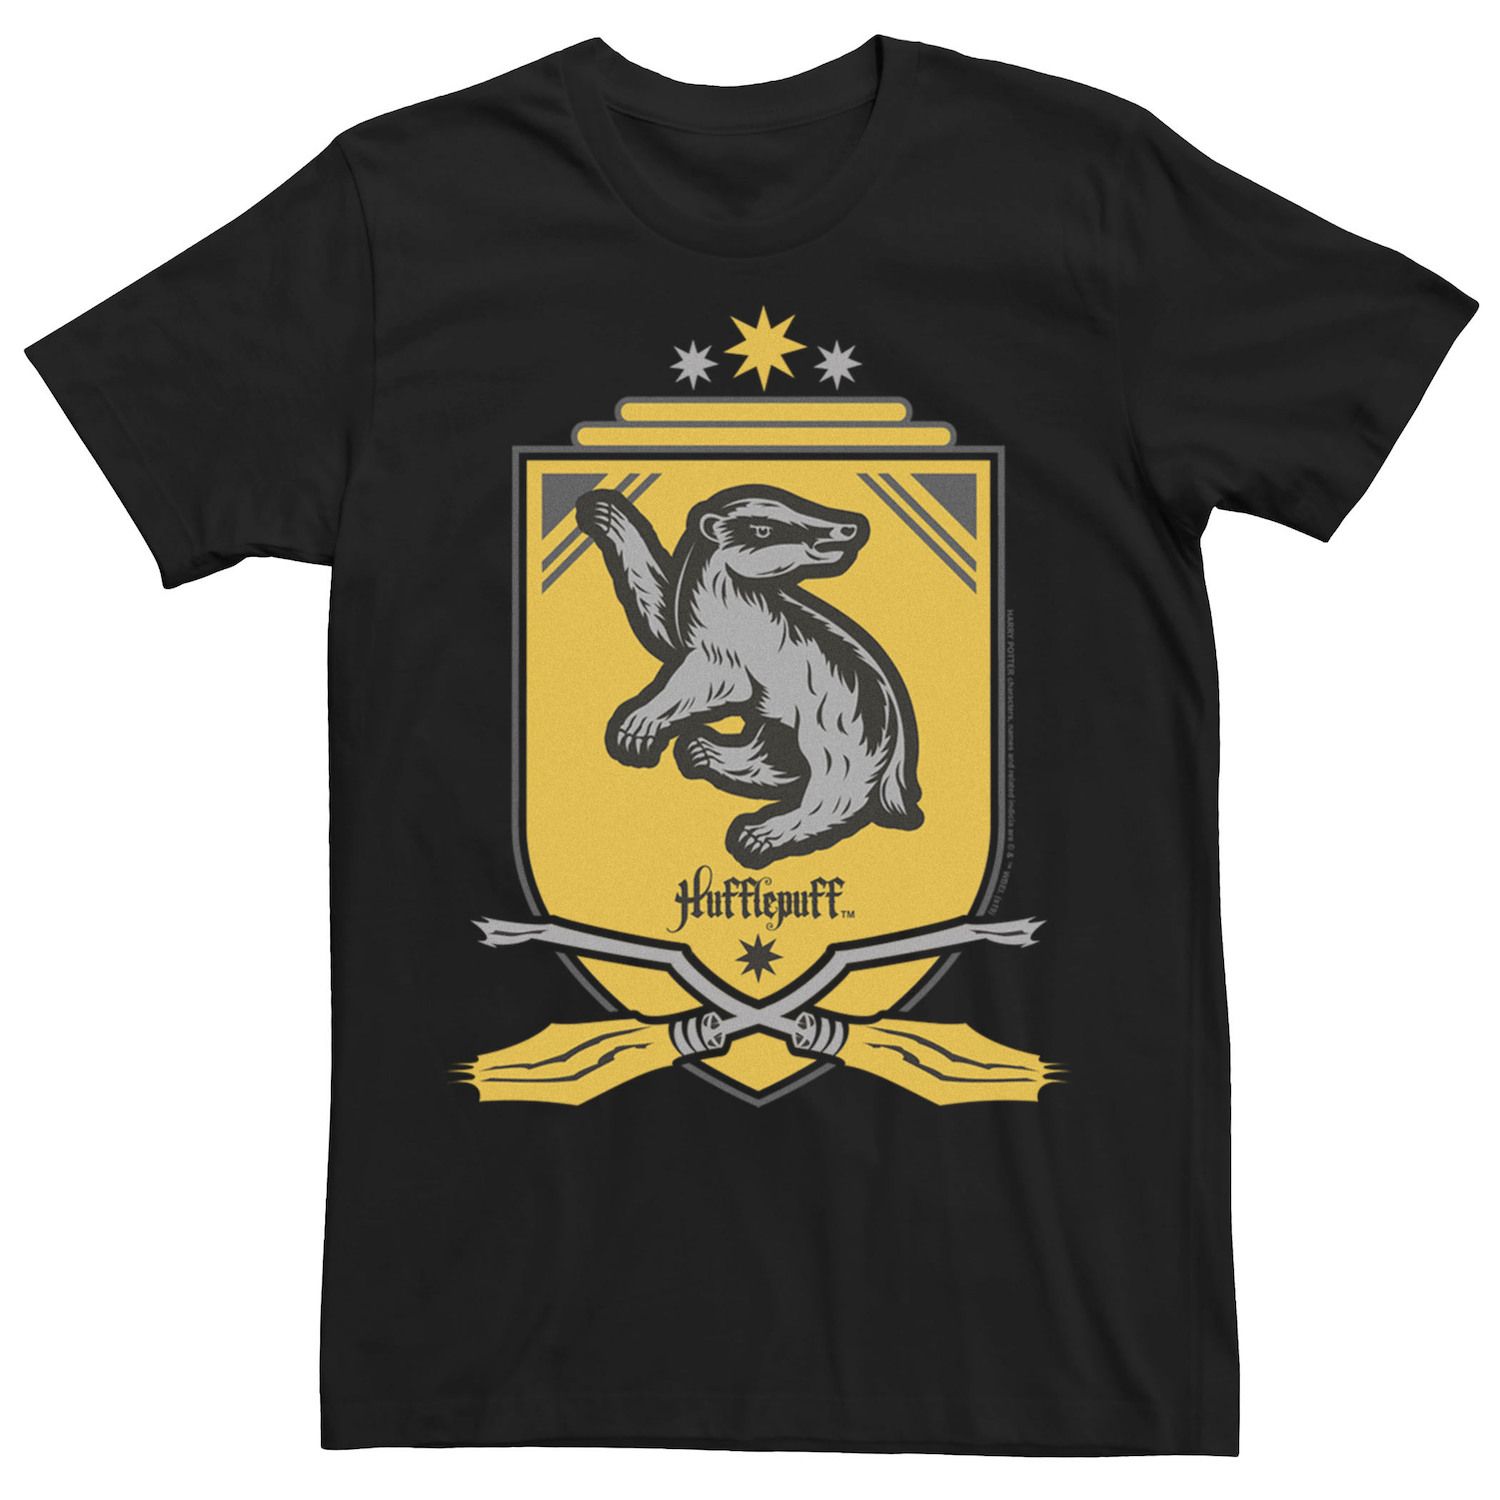 Image for Harry Potter Men's Hufflepuff Quidditch Logo Tee at Kohl's.